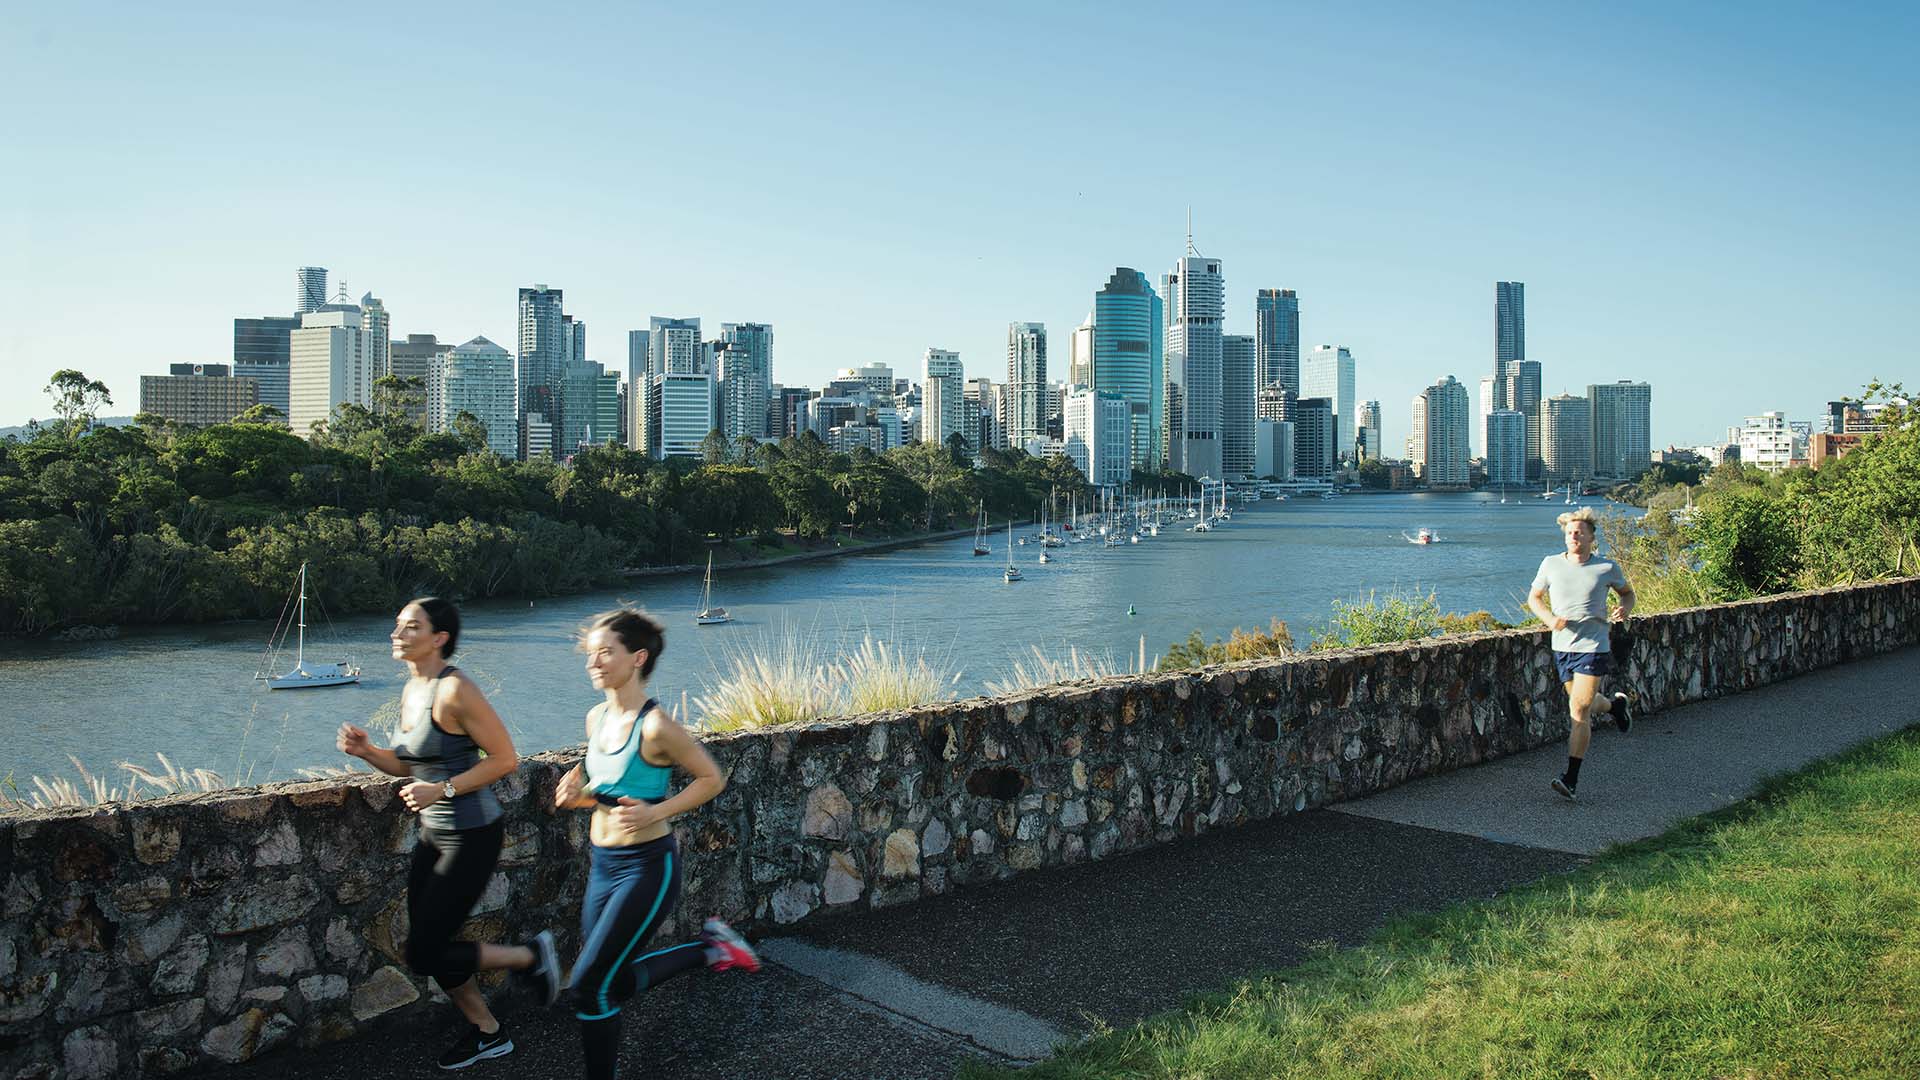 KANGAROO POINT TO WEST END VIA SOUTH BANK - one of the best Brisbane walking and running spots.